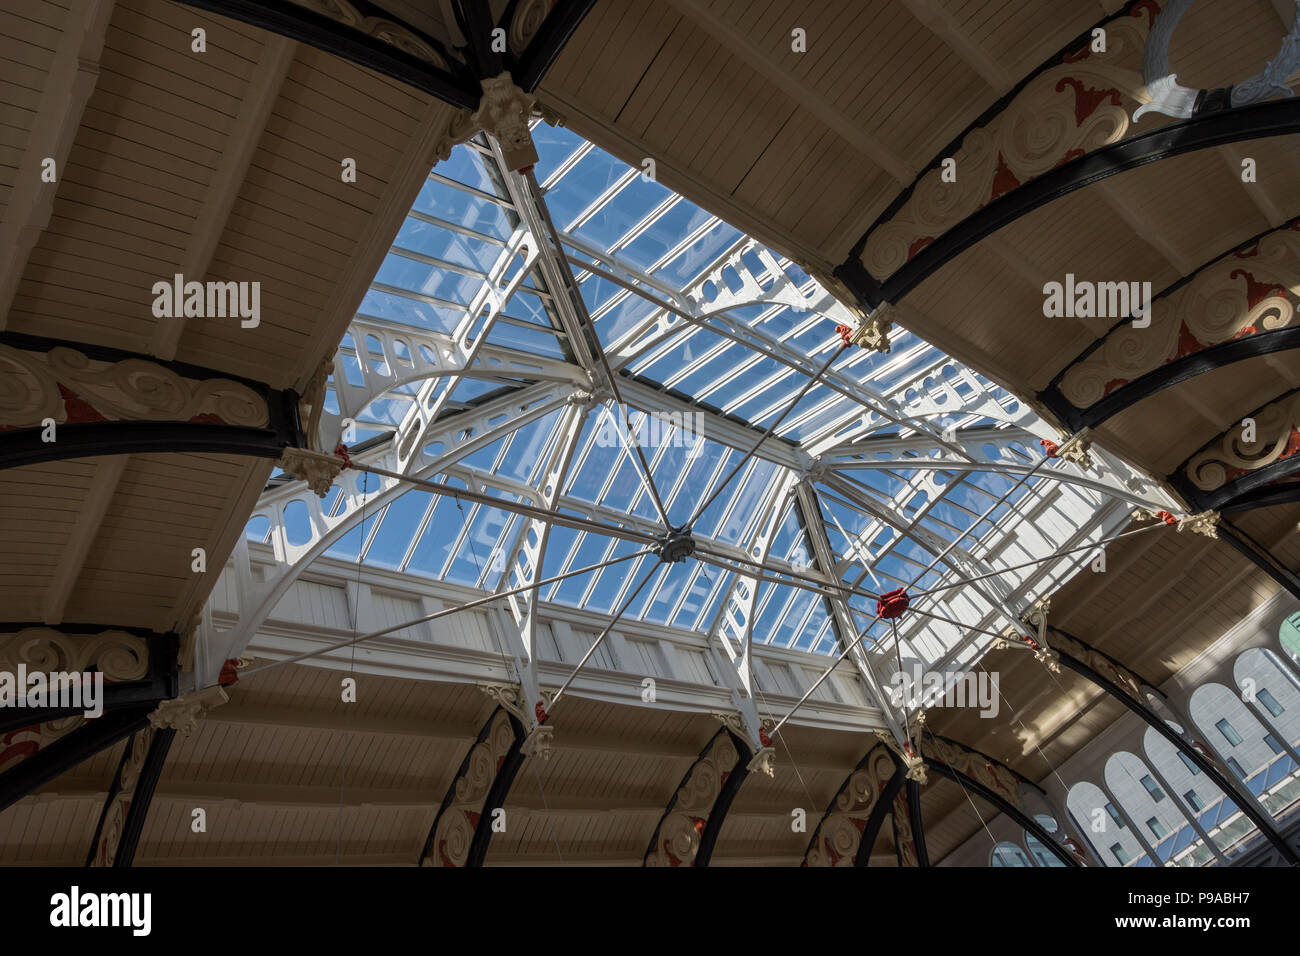 The glass roof of the Mackie Mayor building, a former Victorian meat market, now a food and drink outlet, Northern Quarter, Manchester, England, UK Stock Photo